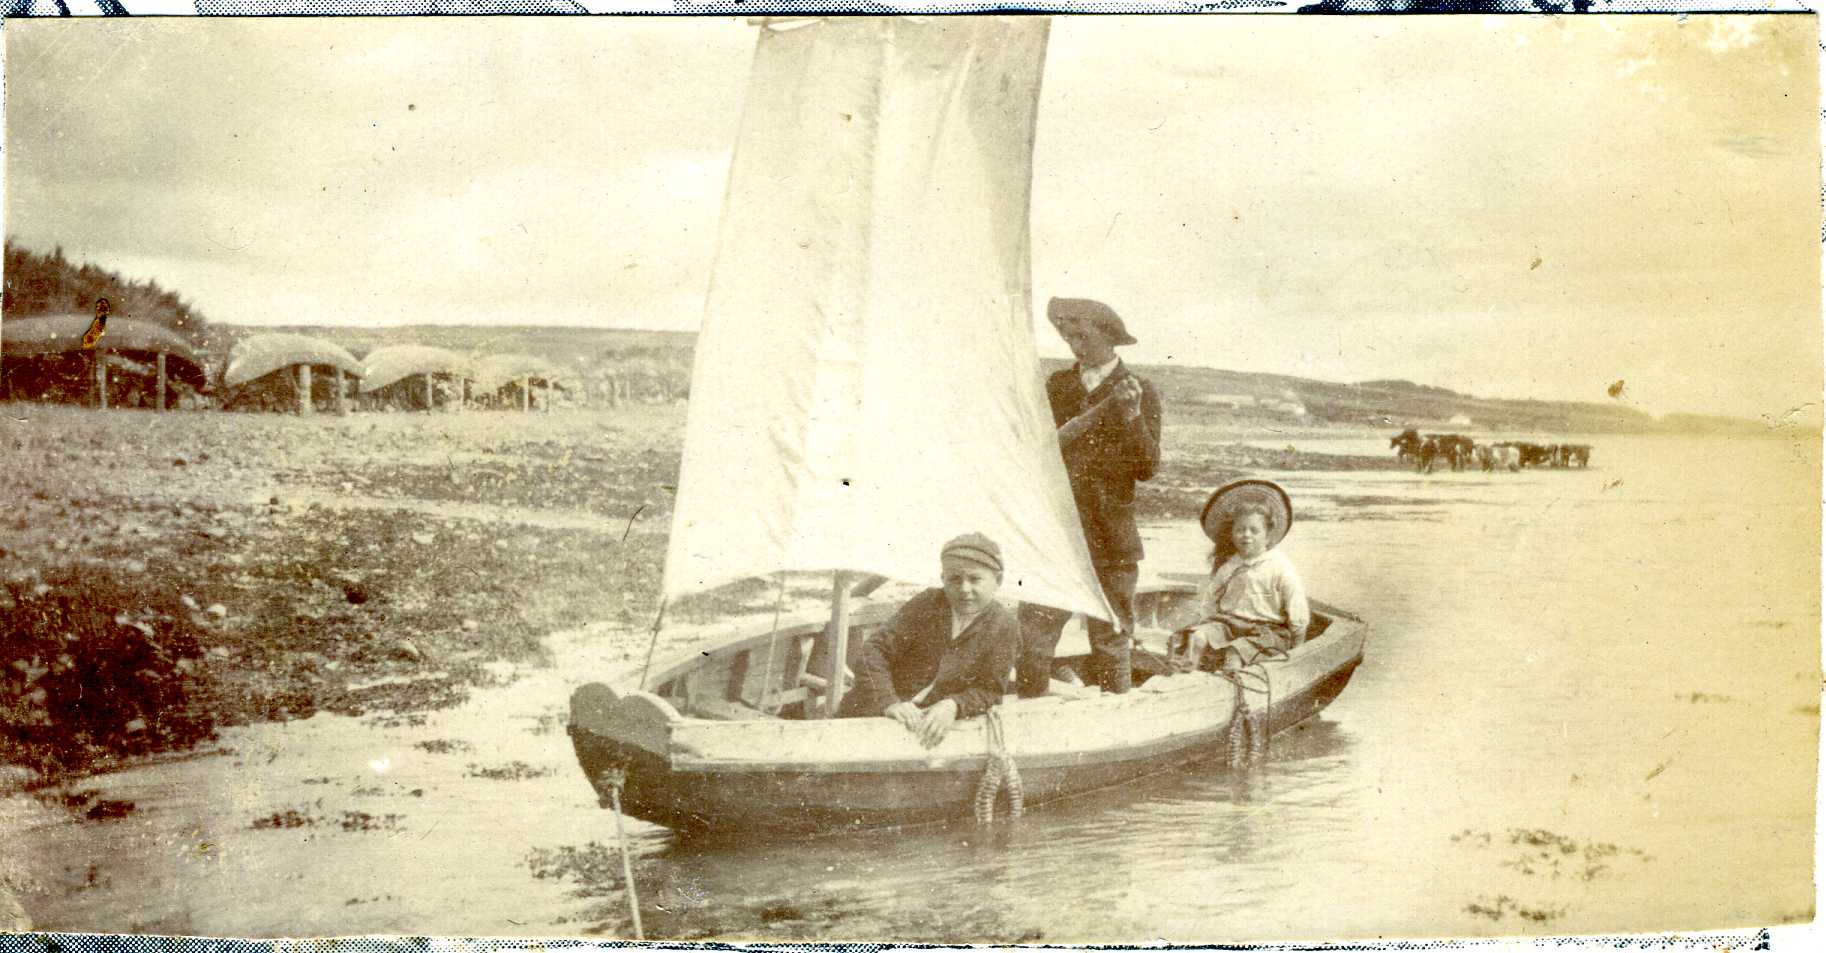 Family sailing on Querrin shore in 1908.